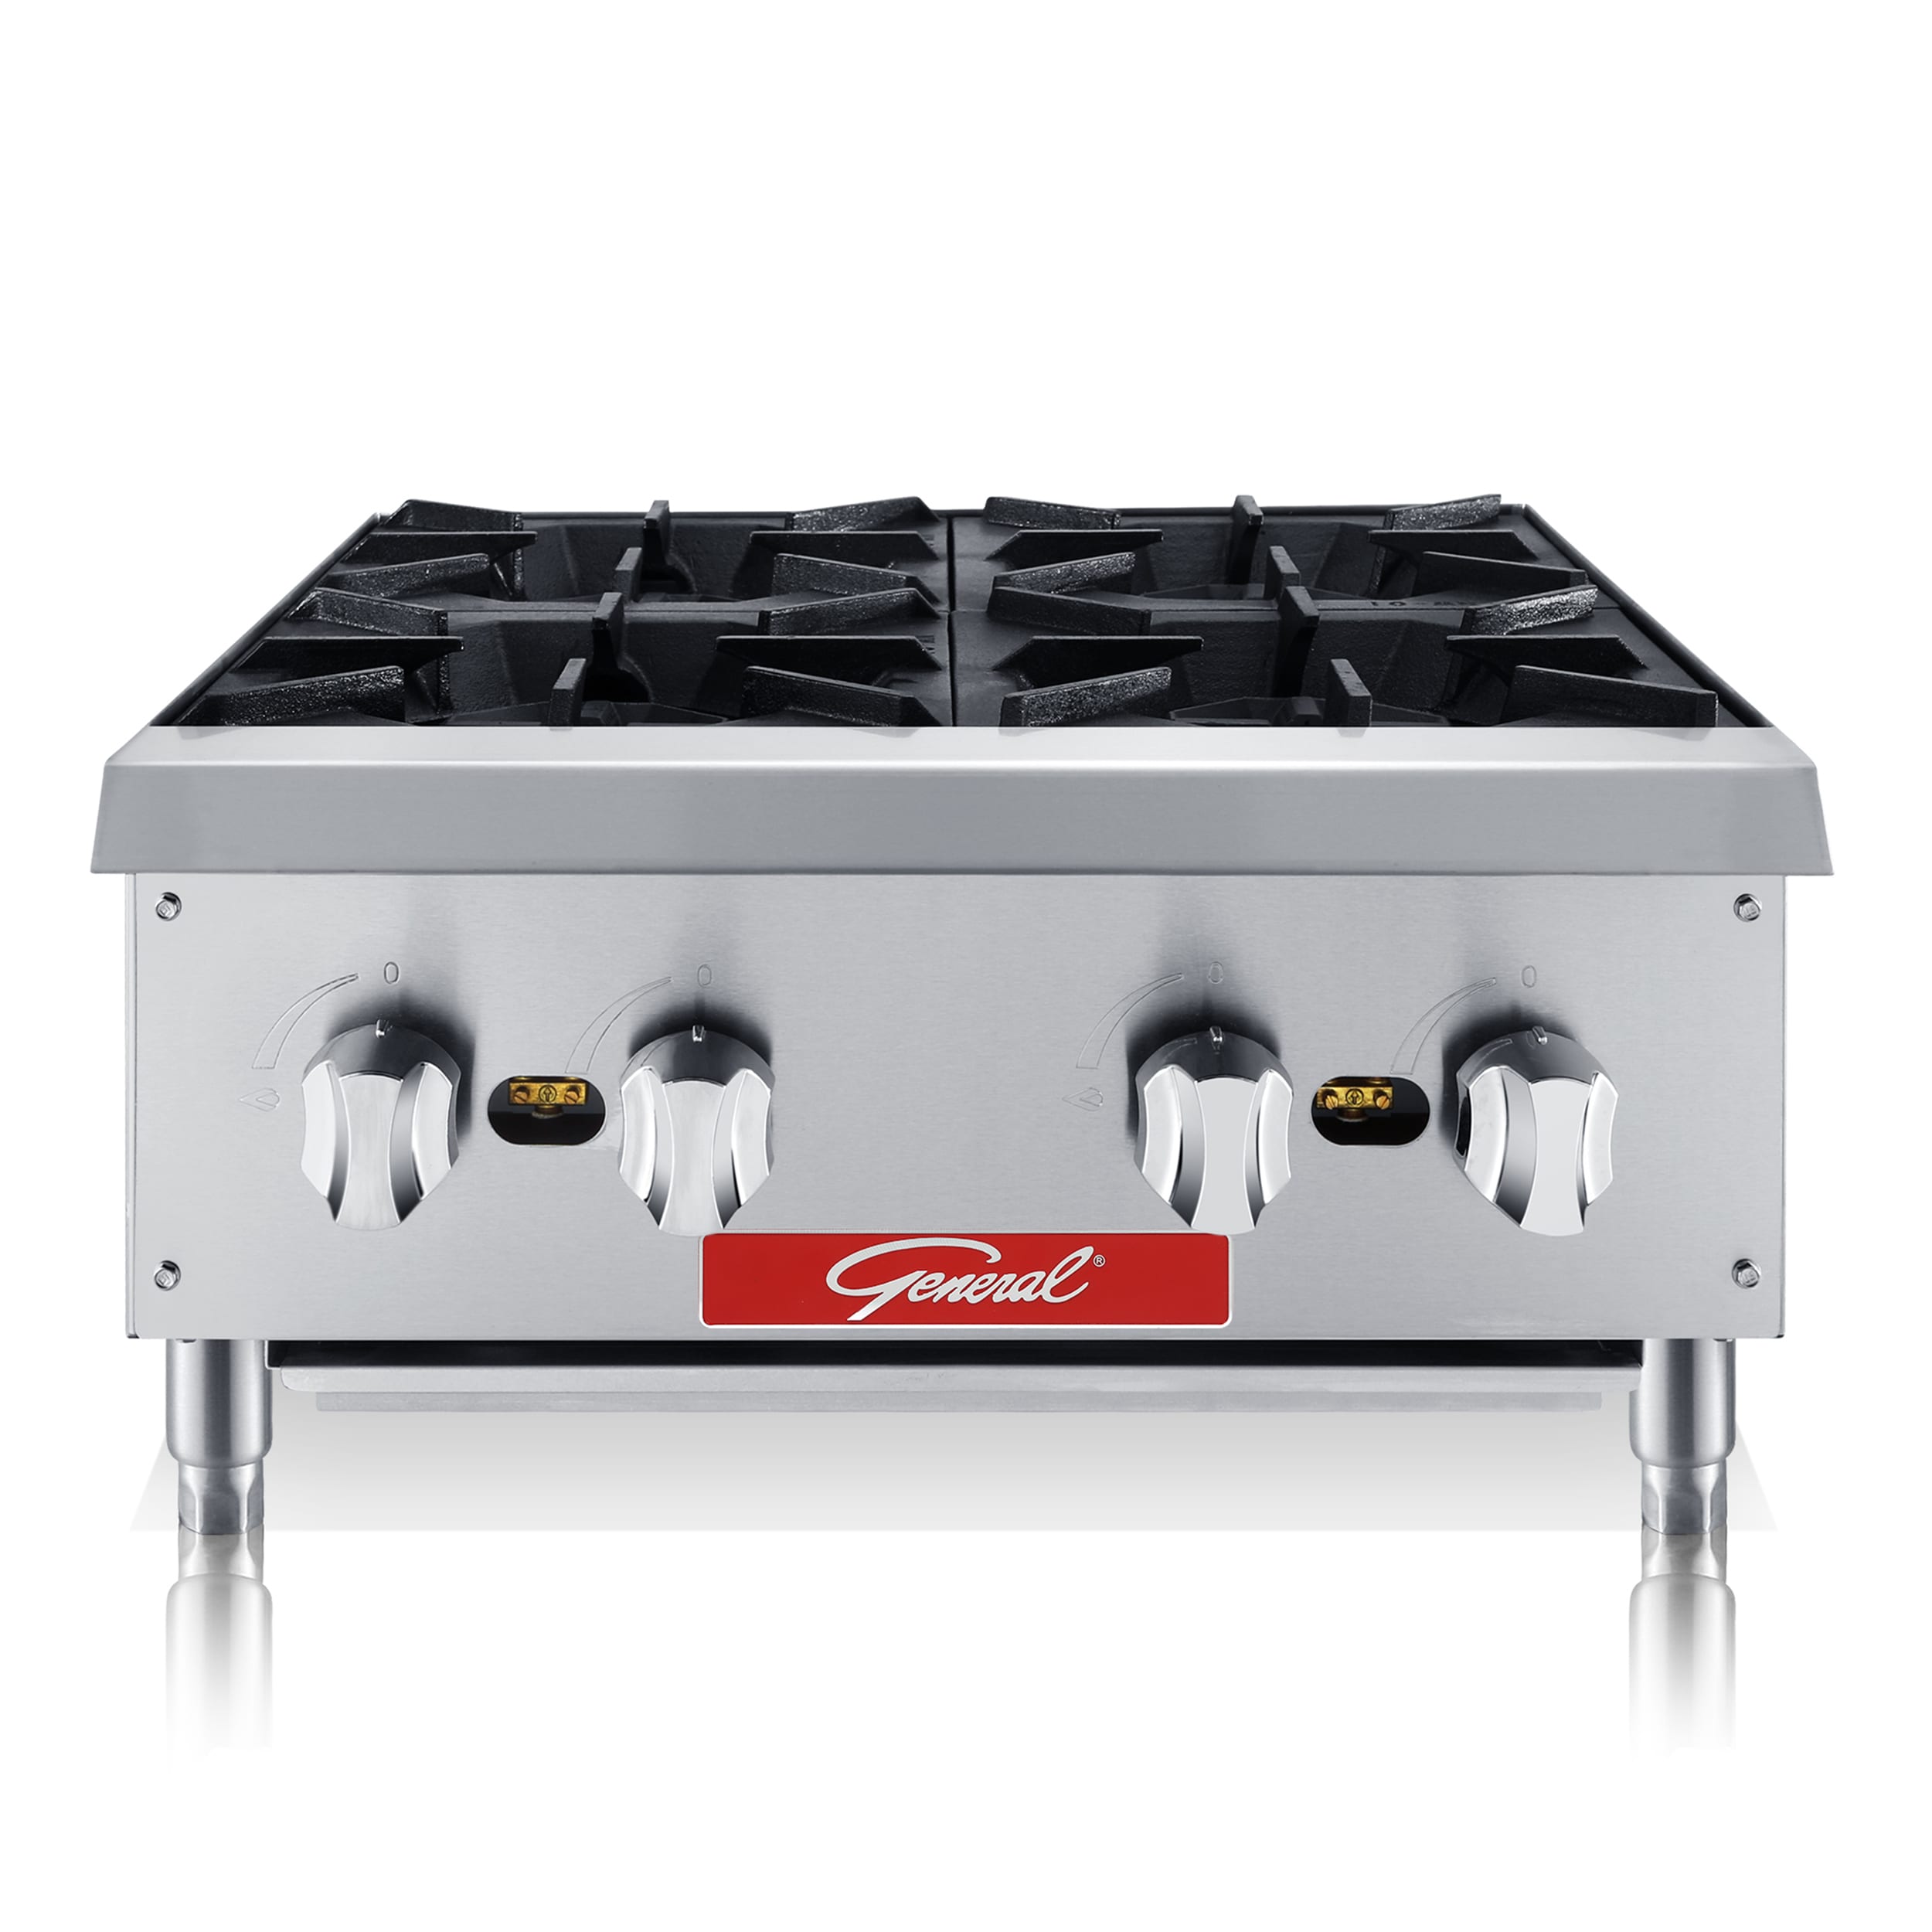 Commercial Hot Plates, Gas & Electric Hot Plates